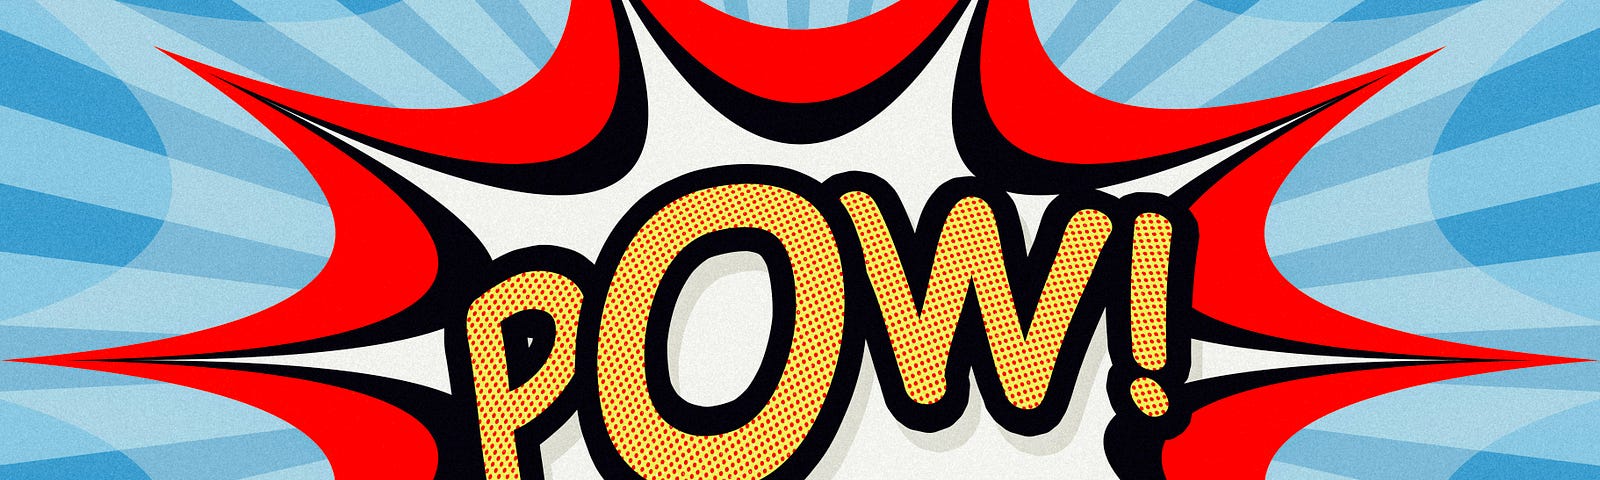 A large cartoon image of the word “POW!”